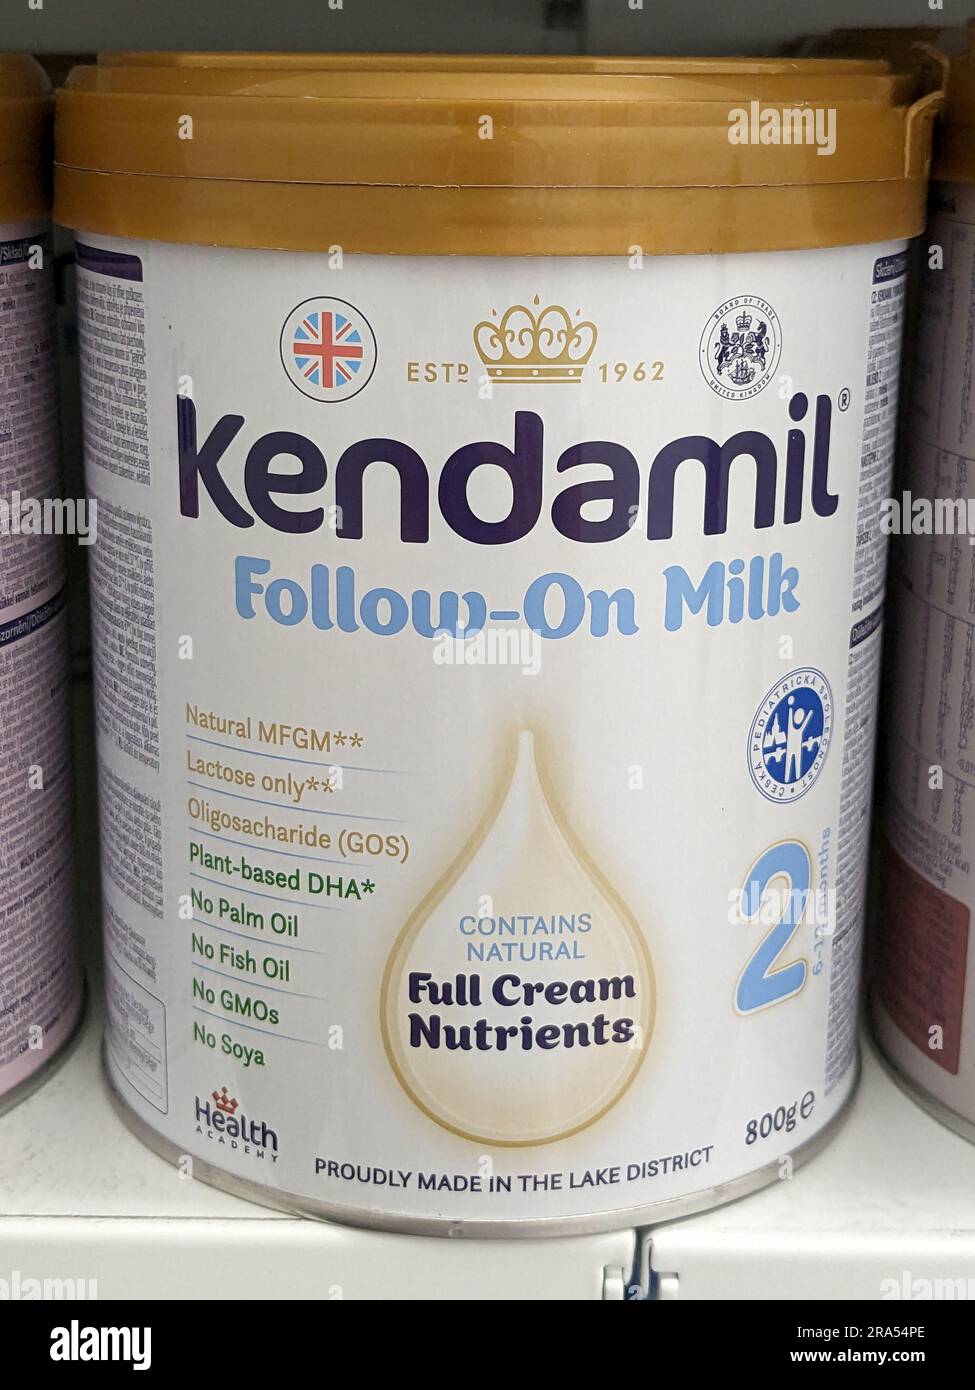 Kendamil infant milk displayed on the shelves in a pharmacy. Kendamil is UK-made baby milk, organic baby milk and goat formula,Czech republic,Europe Stock Photo